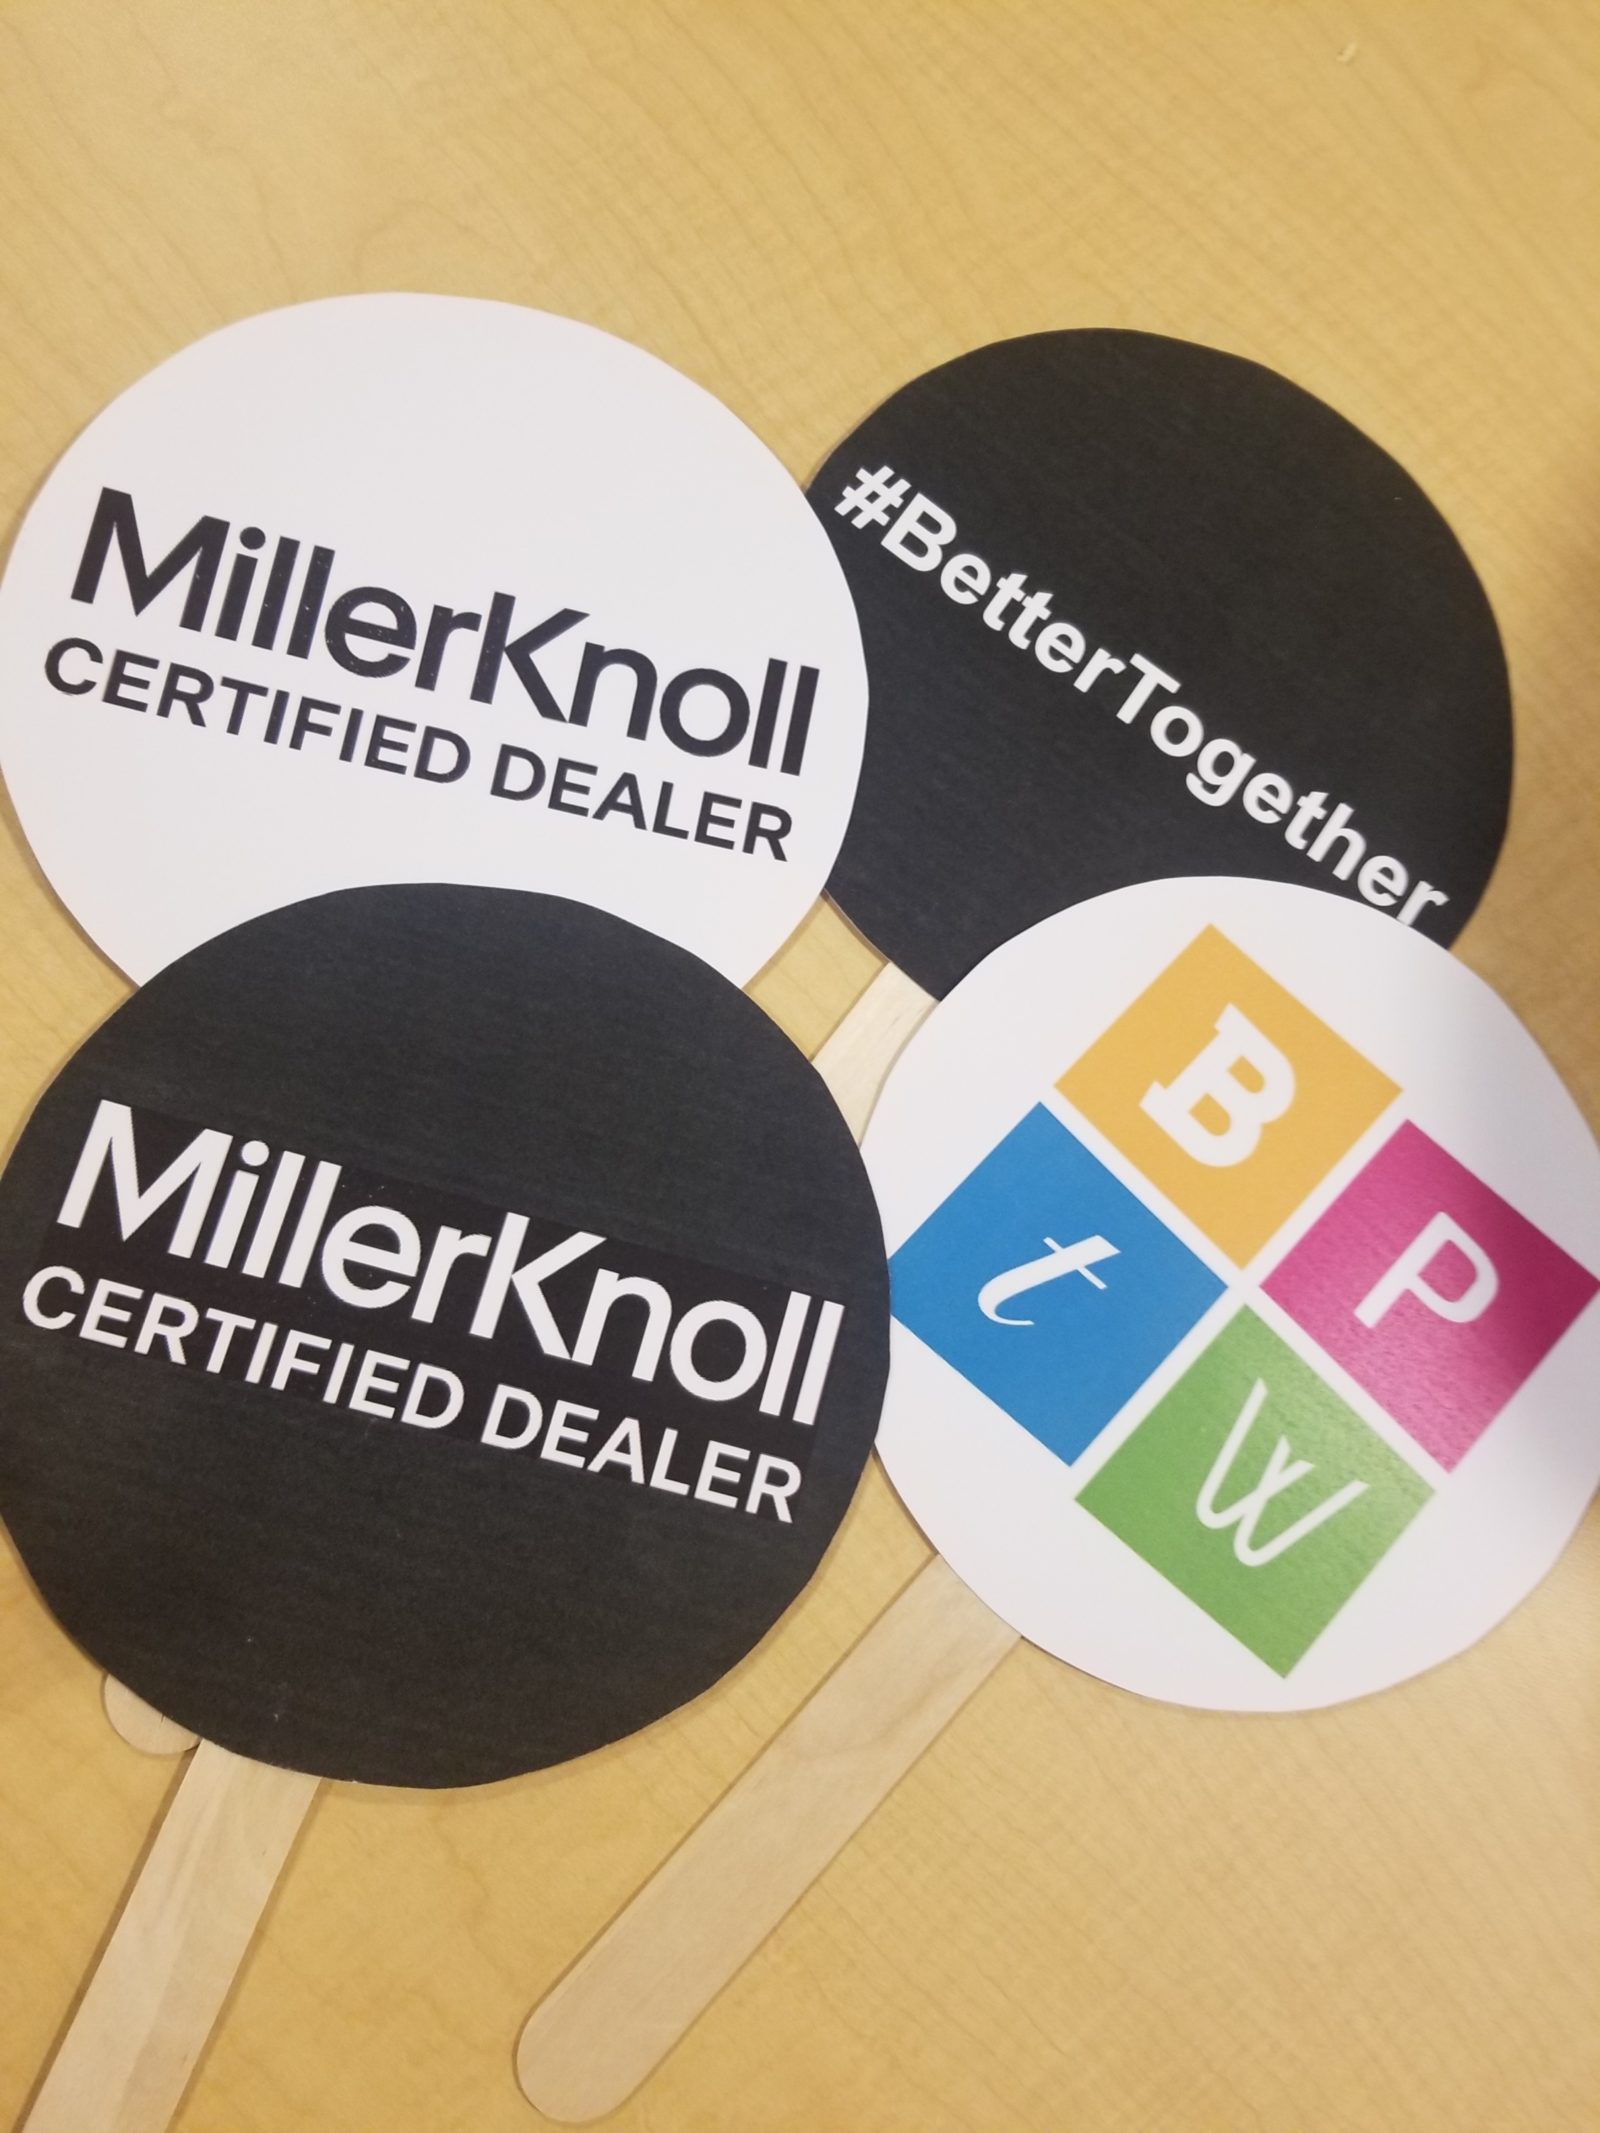 4 round signs with handles showing different images on each: MillerKnoll Certified Dealer logo, Best Places to Work logo and #BetterTogether